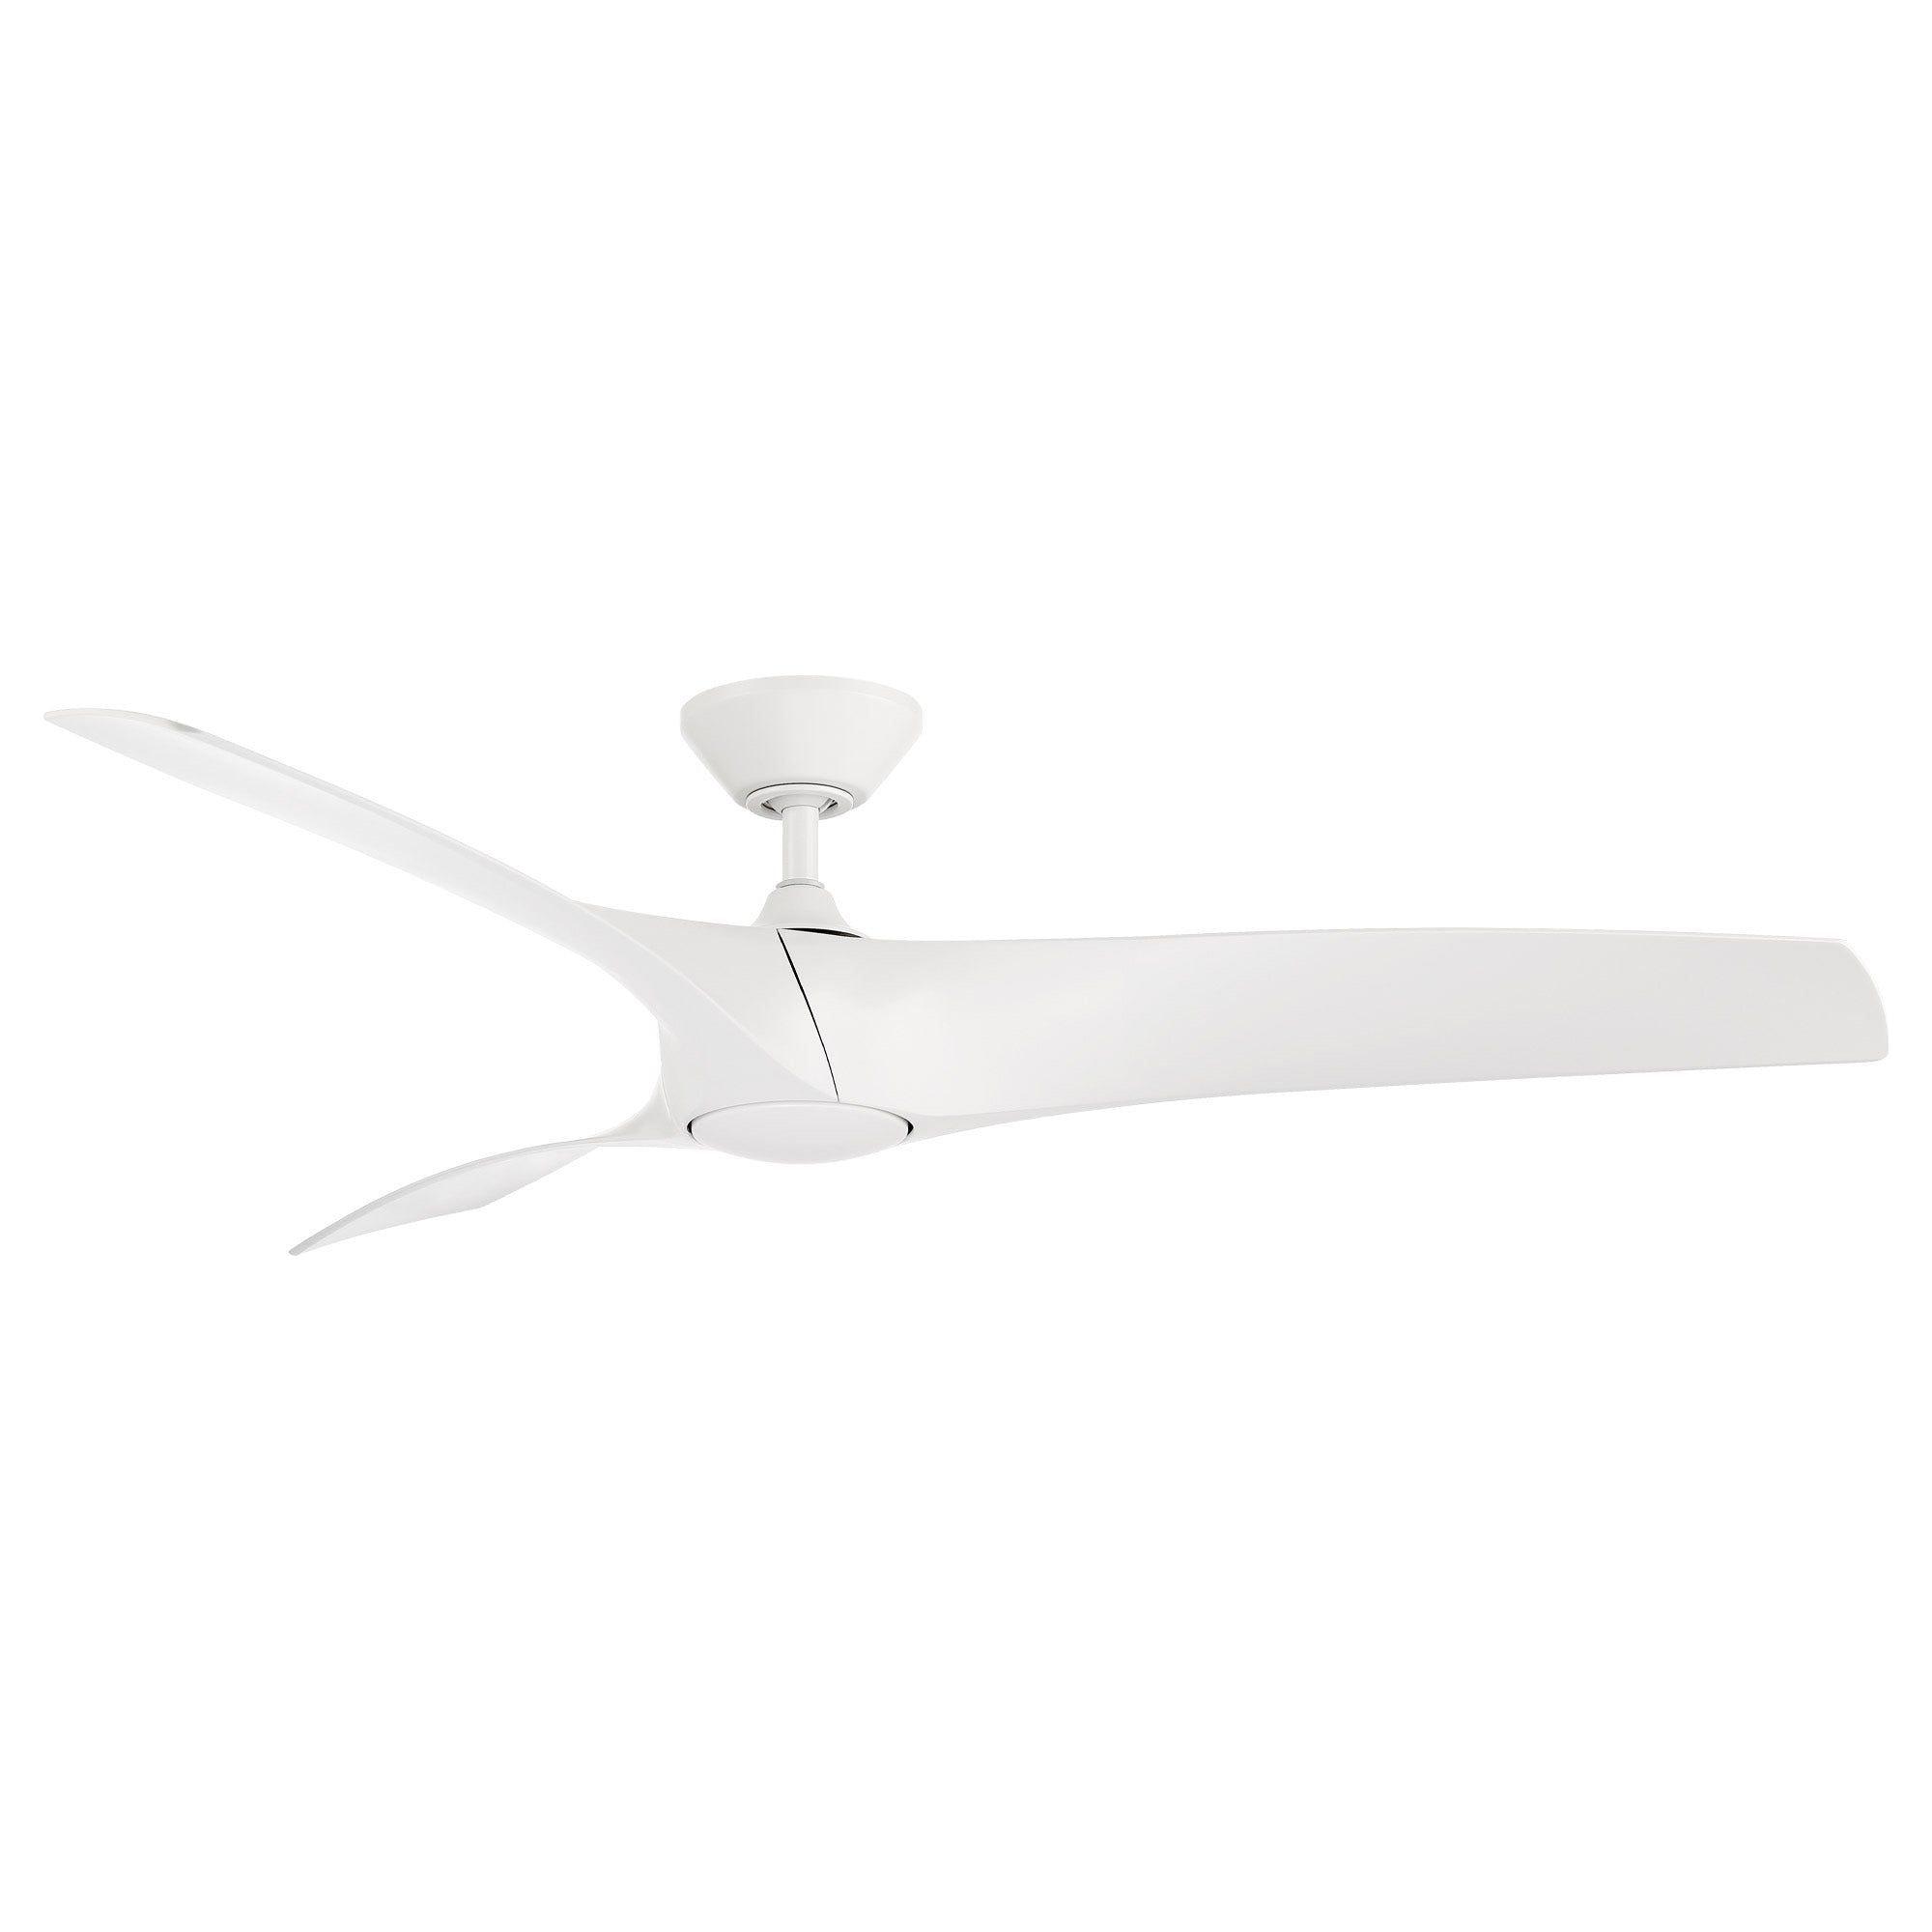 Modern Forms - Zephyr Indoor/Outdoor 3-Blade 62" Smart Ceiling Fan with LED Light Kit and Remote Control - Lights Canada